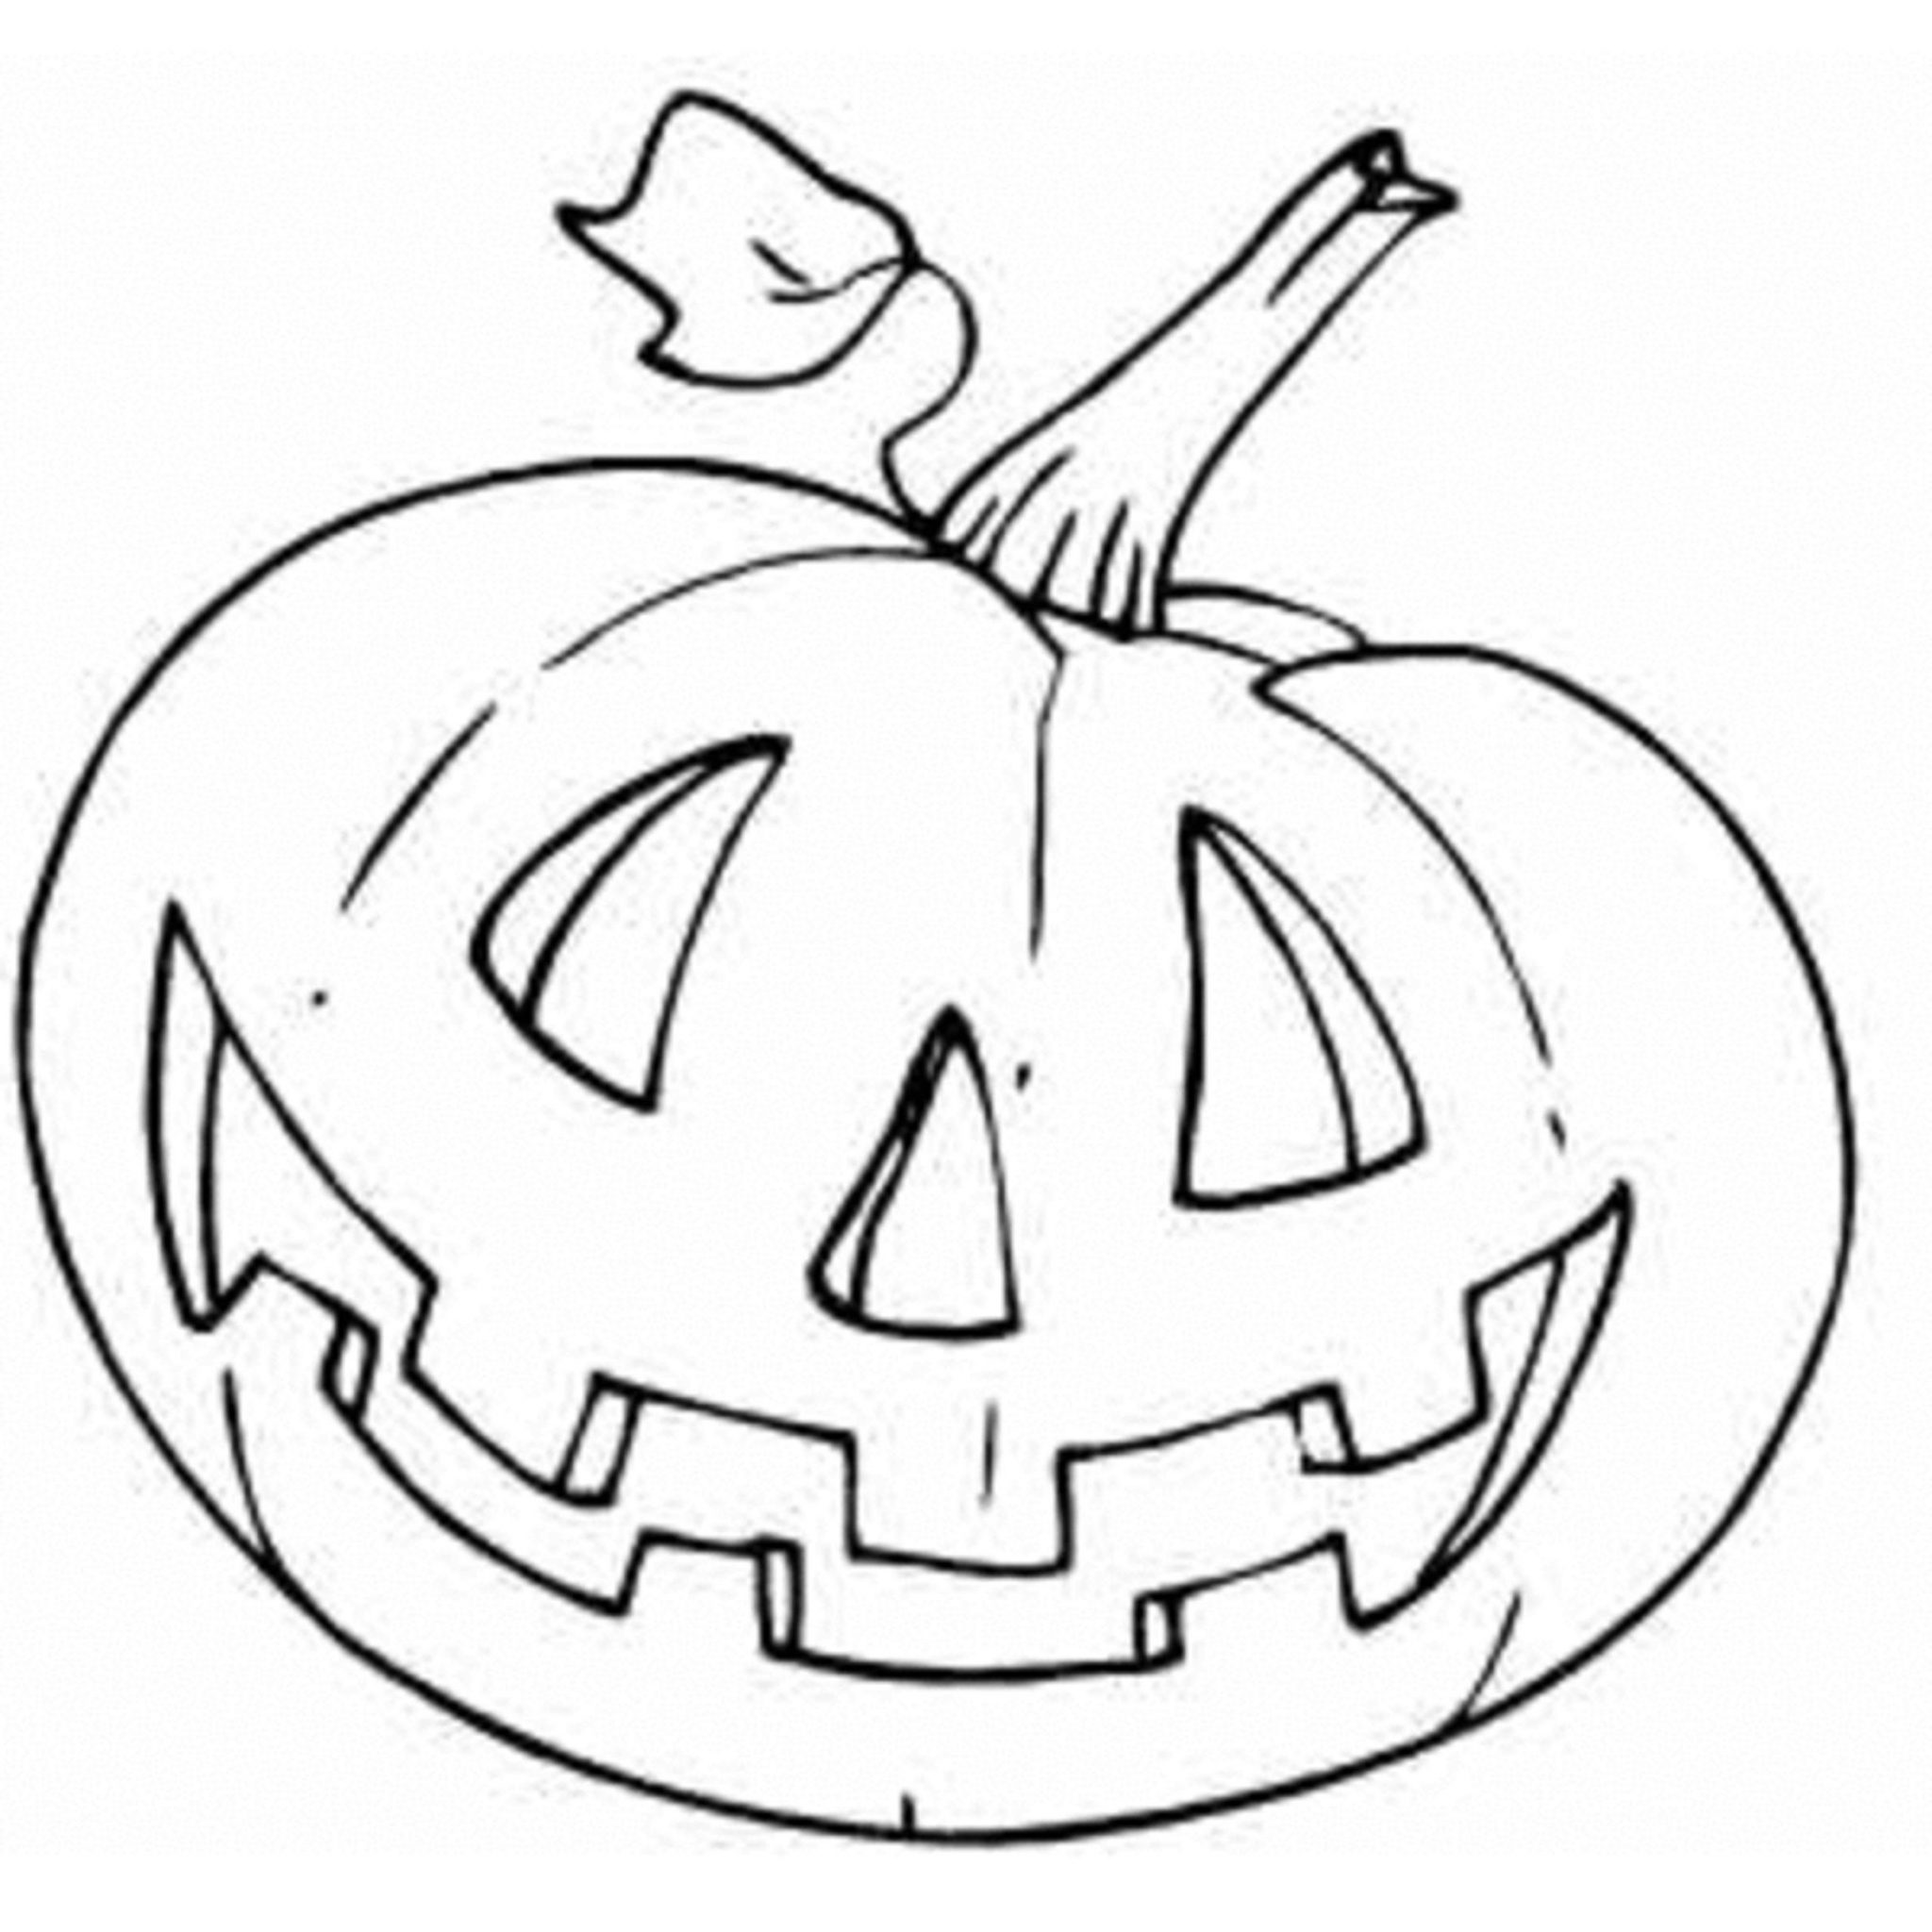 Download Print & Download - Pumpkin Coloring Pages and Benefits of ...